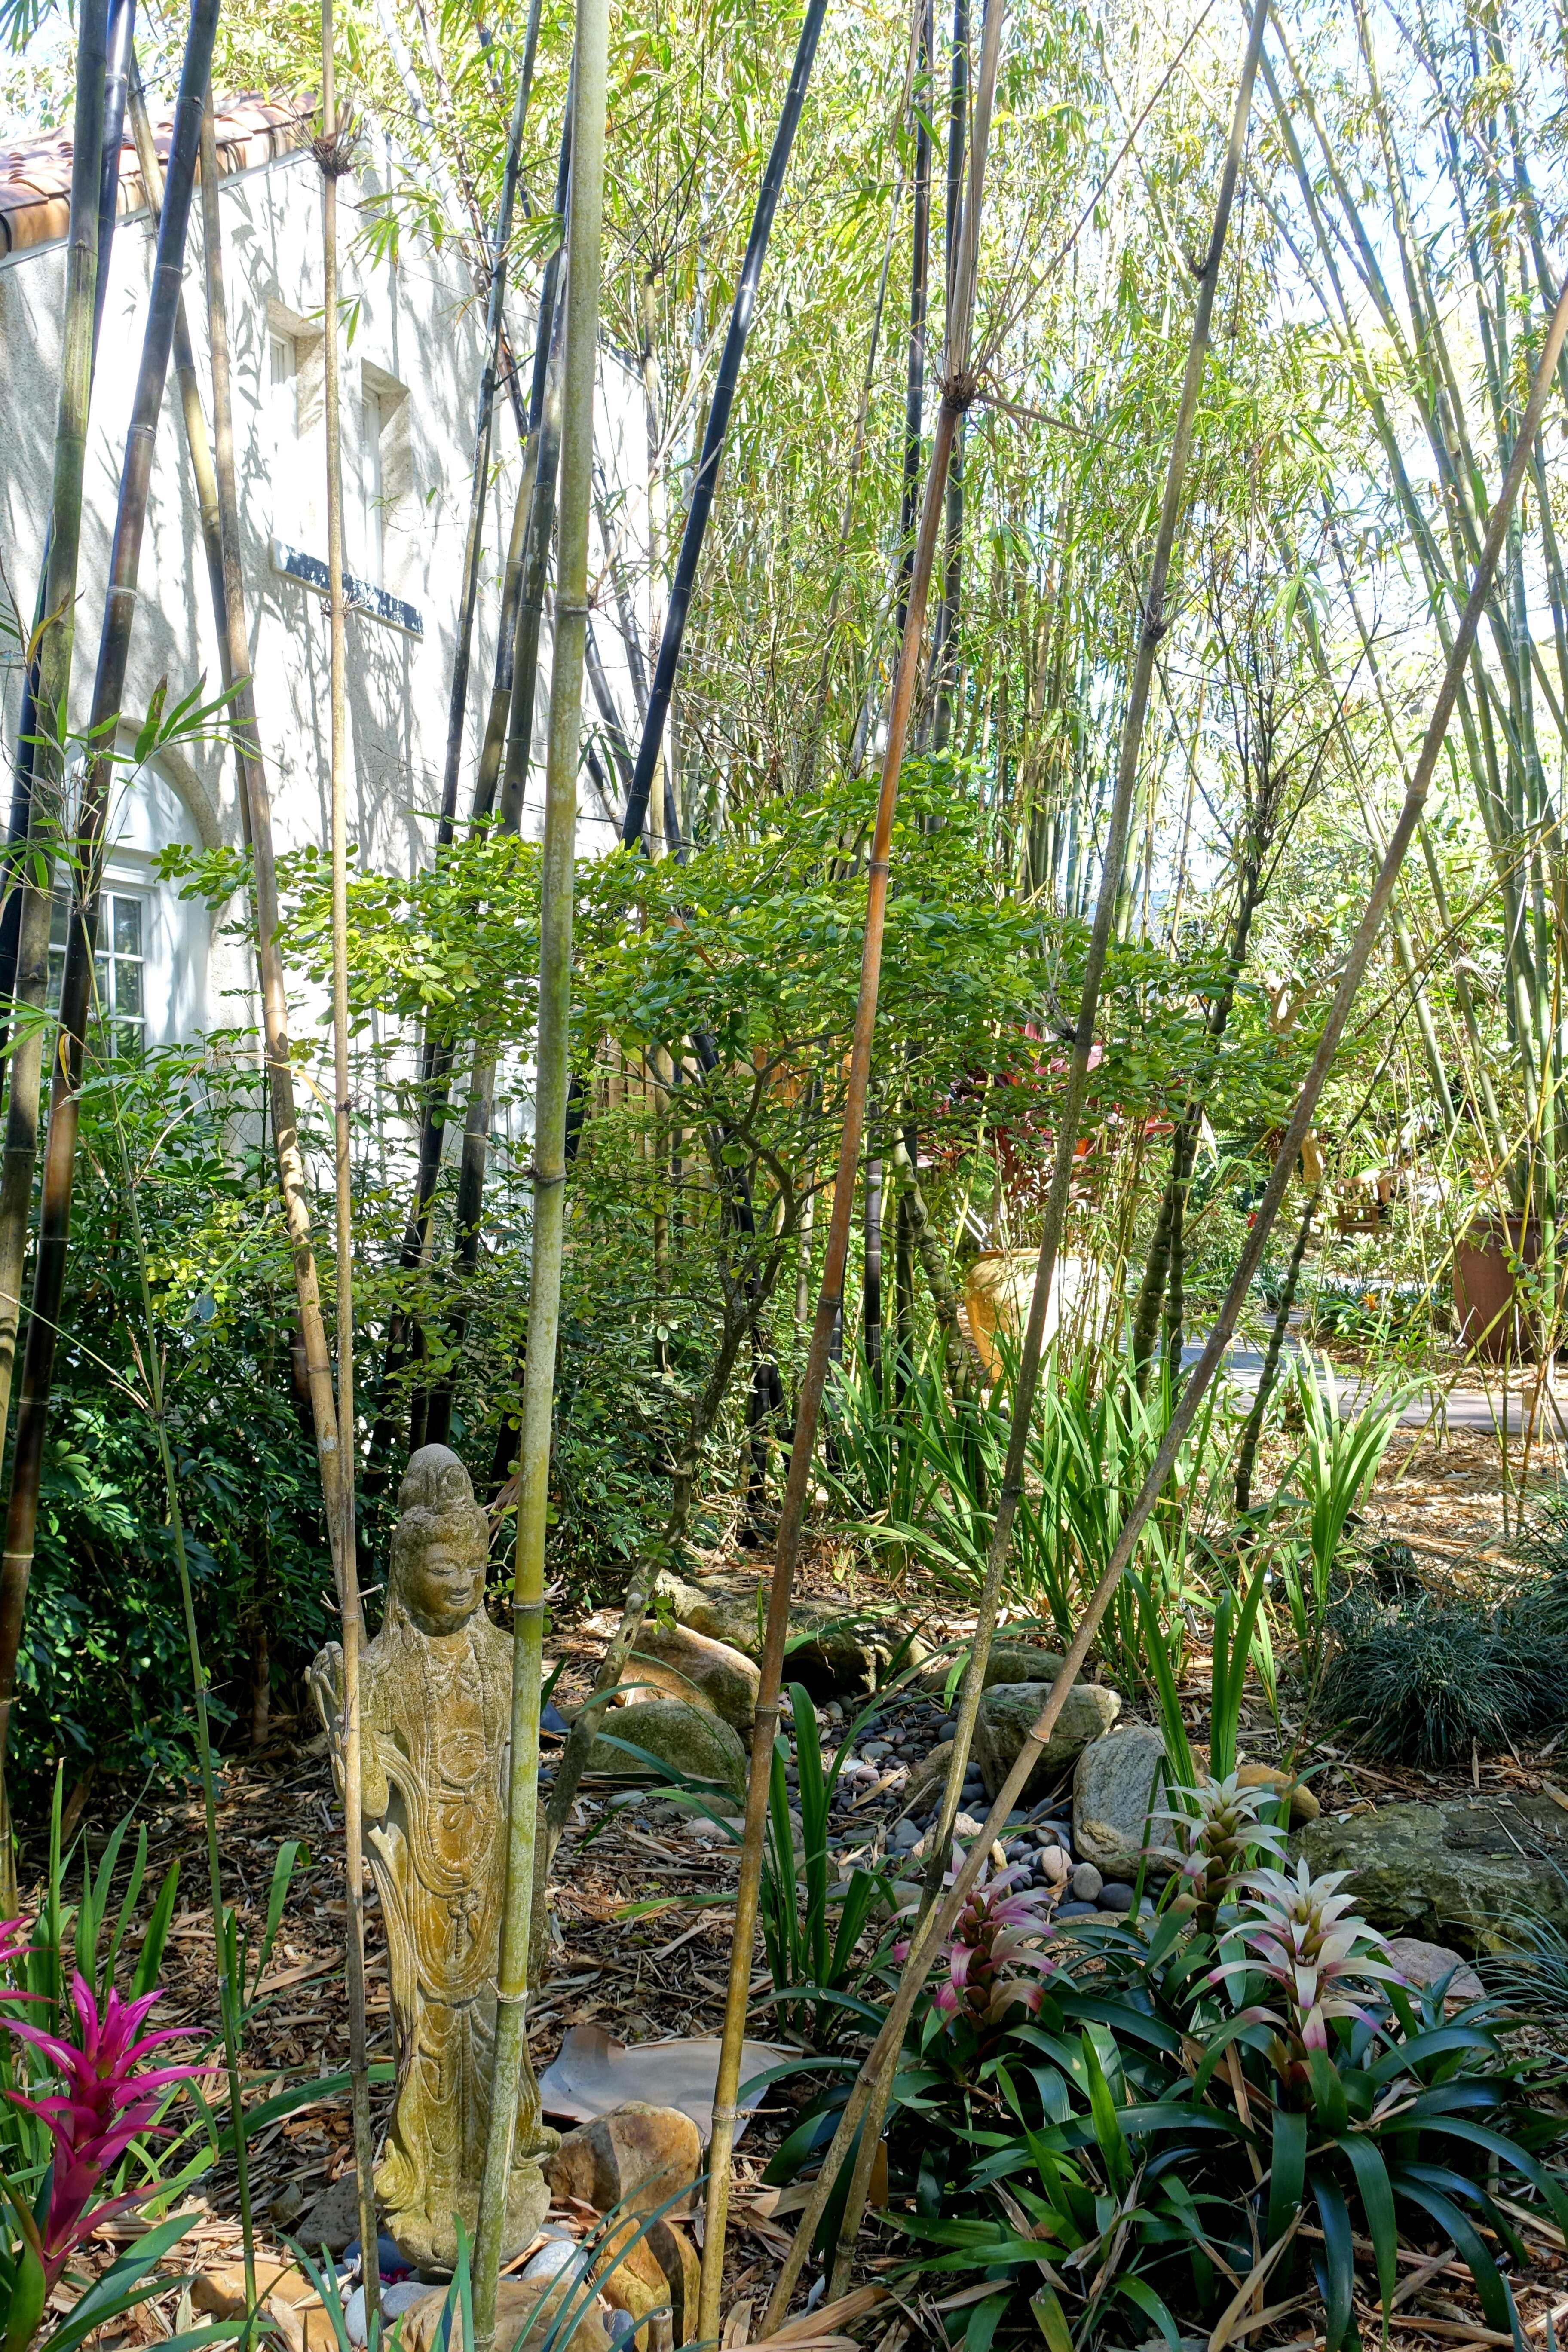 Image of Tropical Blue Bamboo